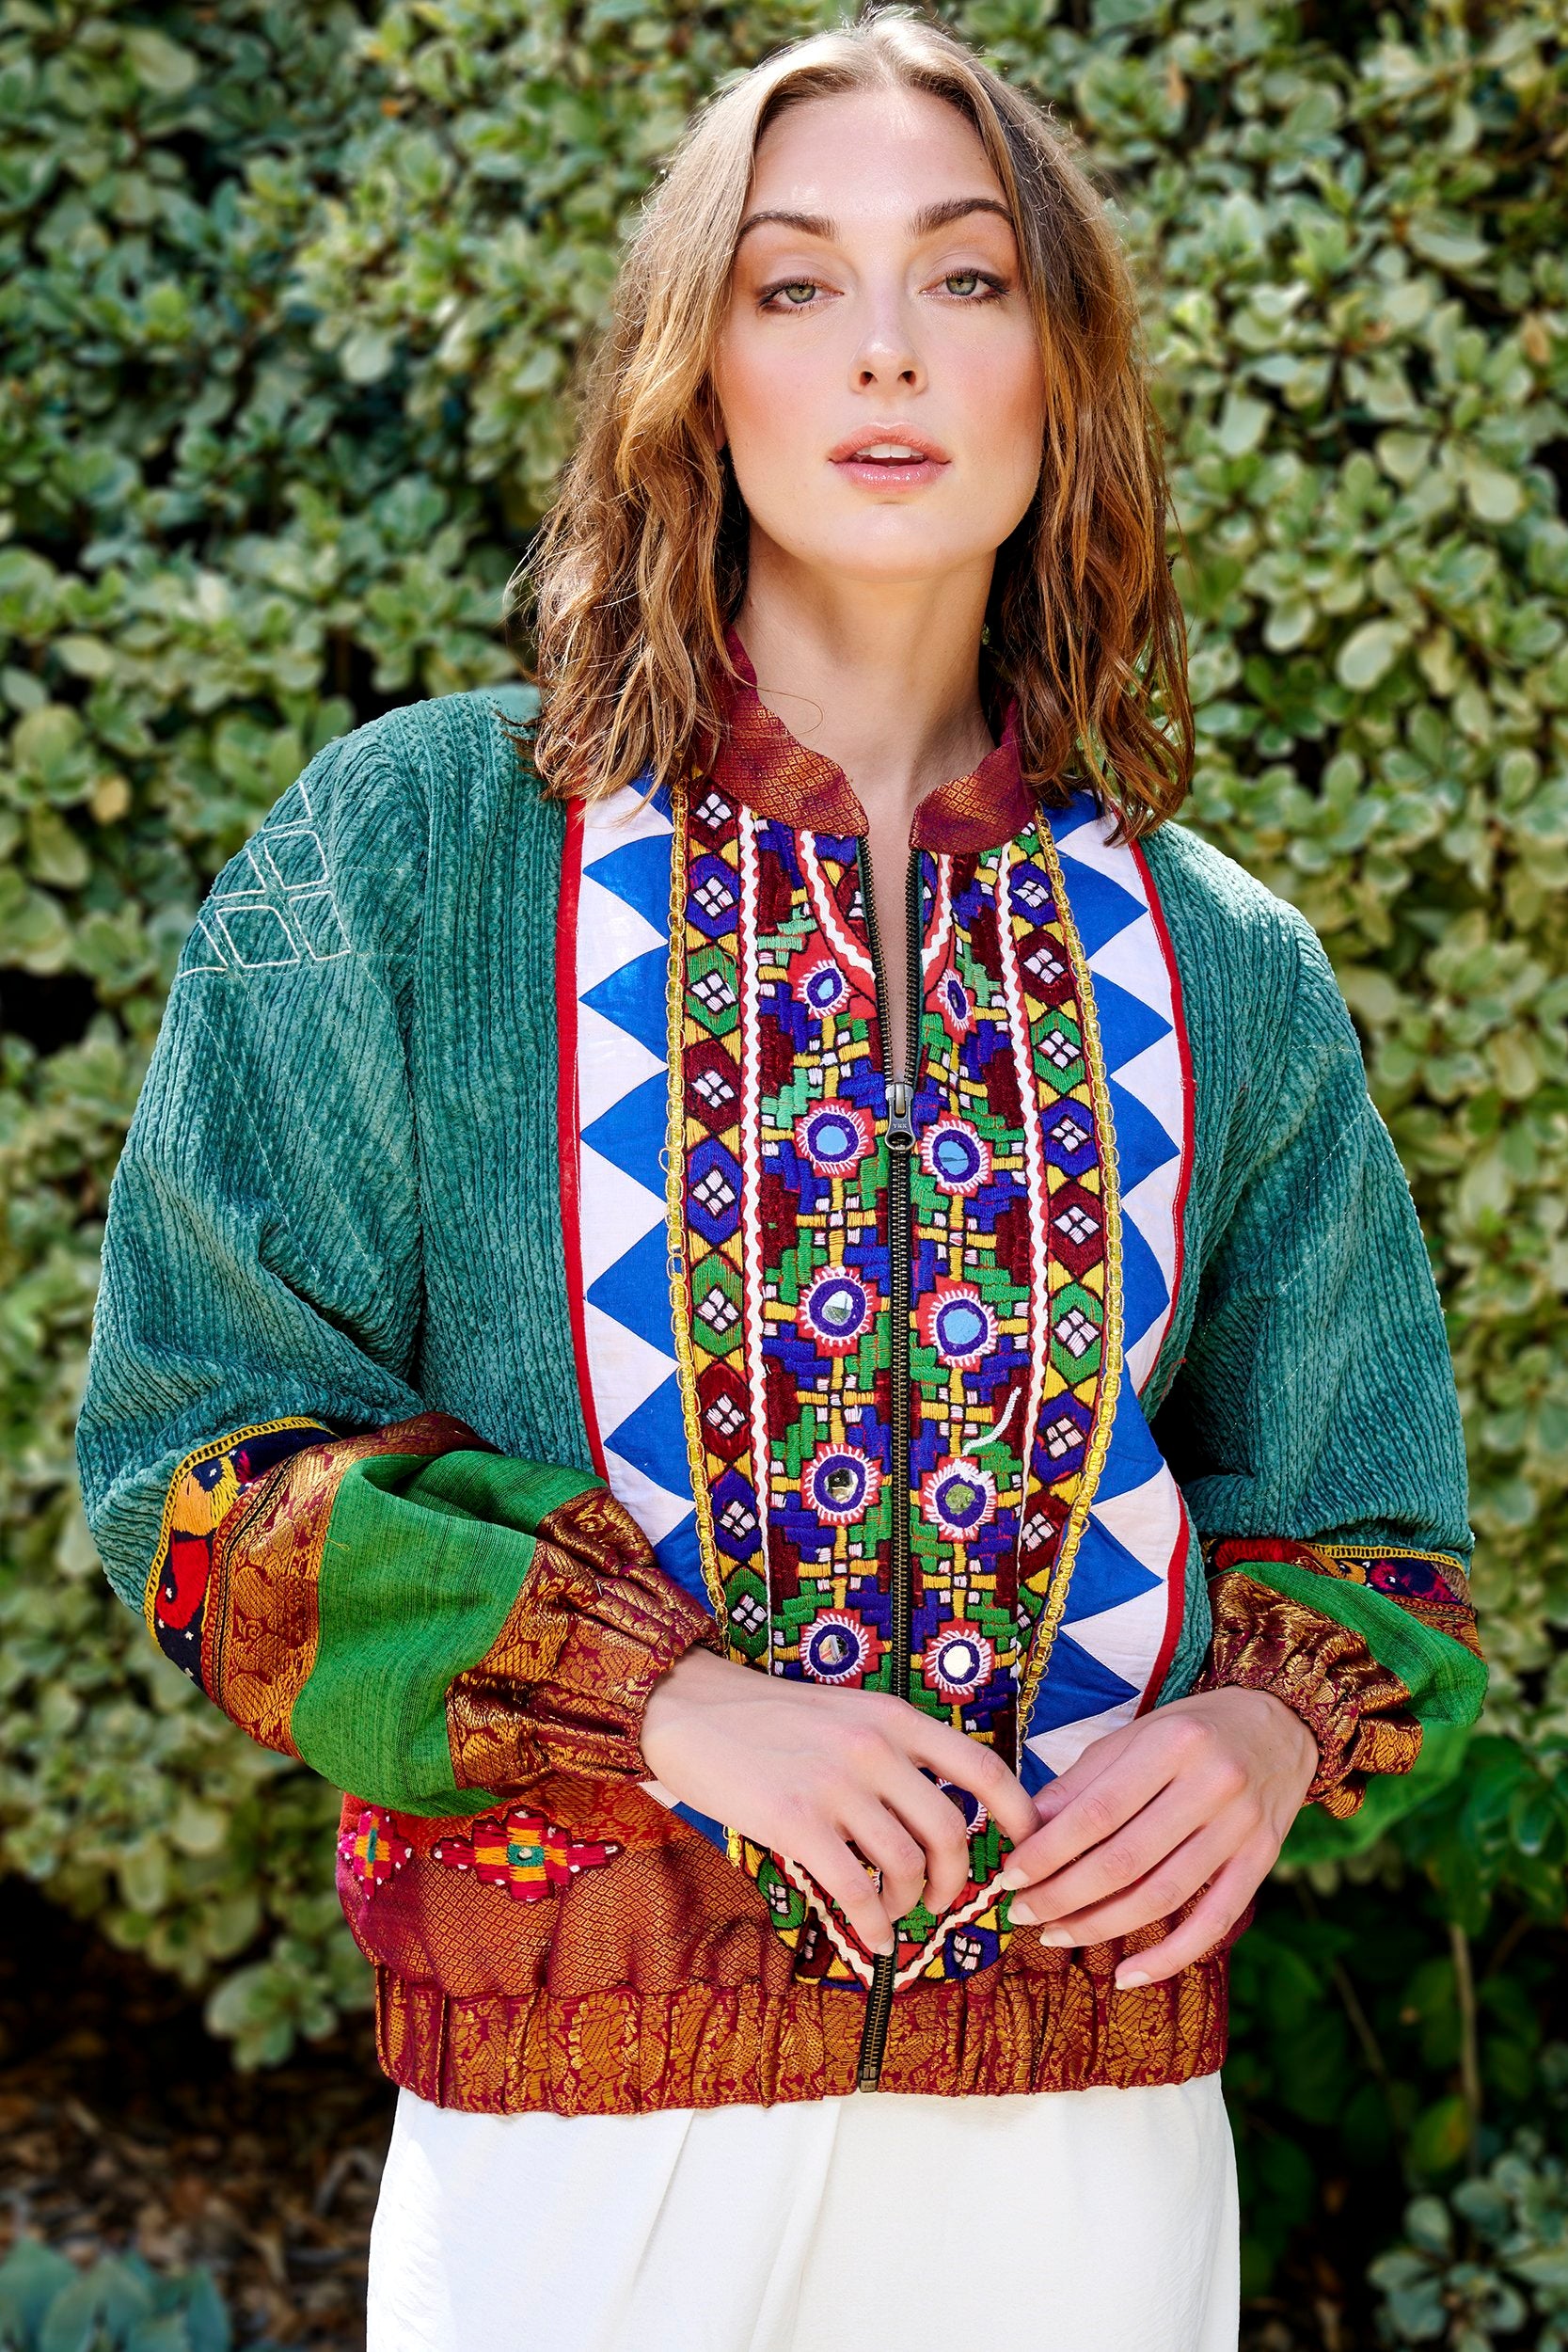 Model wearing a green bomber jacket with mirrored patchwork design.A perfect blend of style and sustainability in fashion.